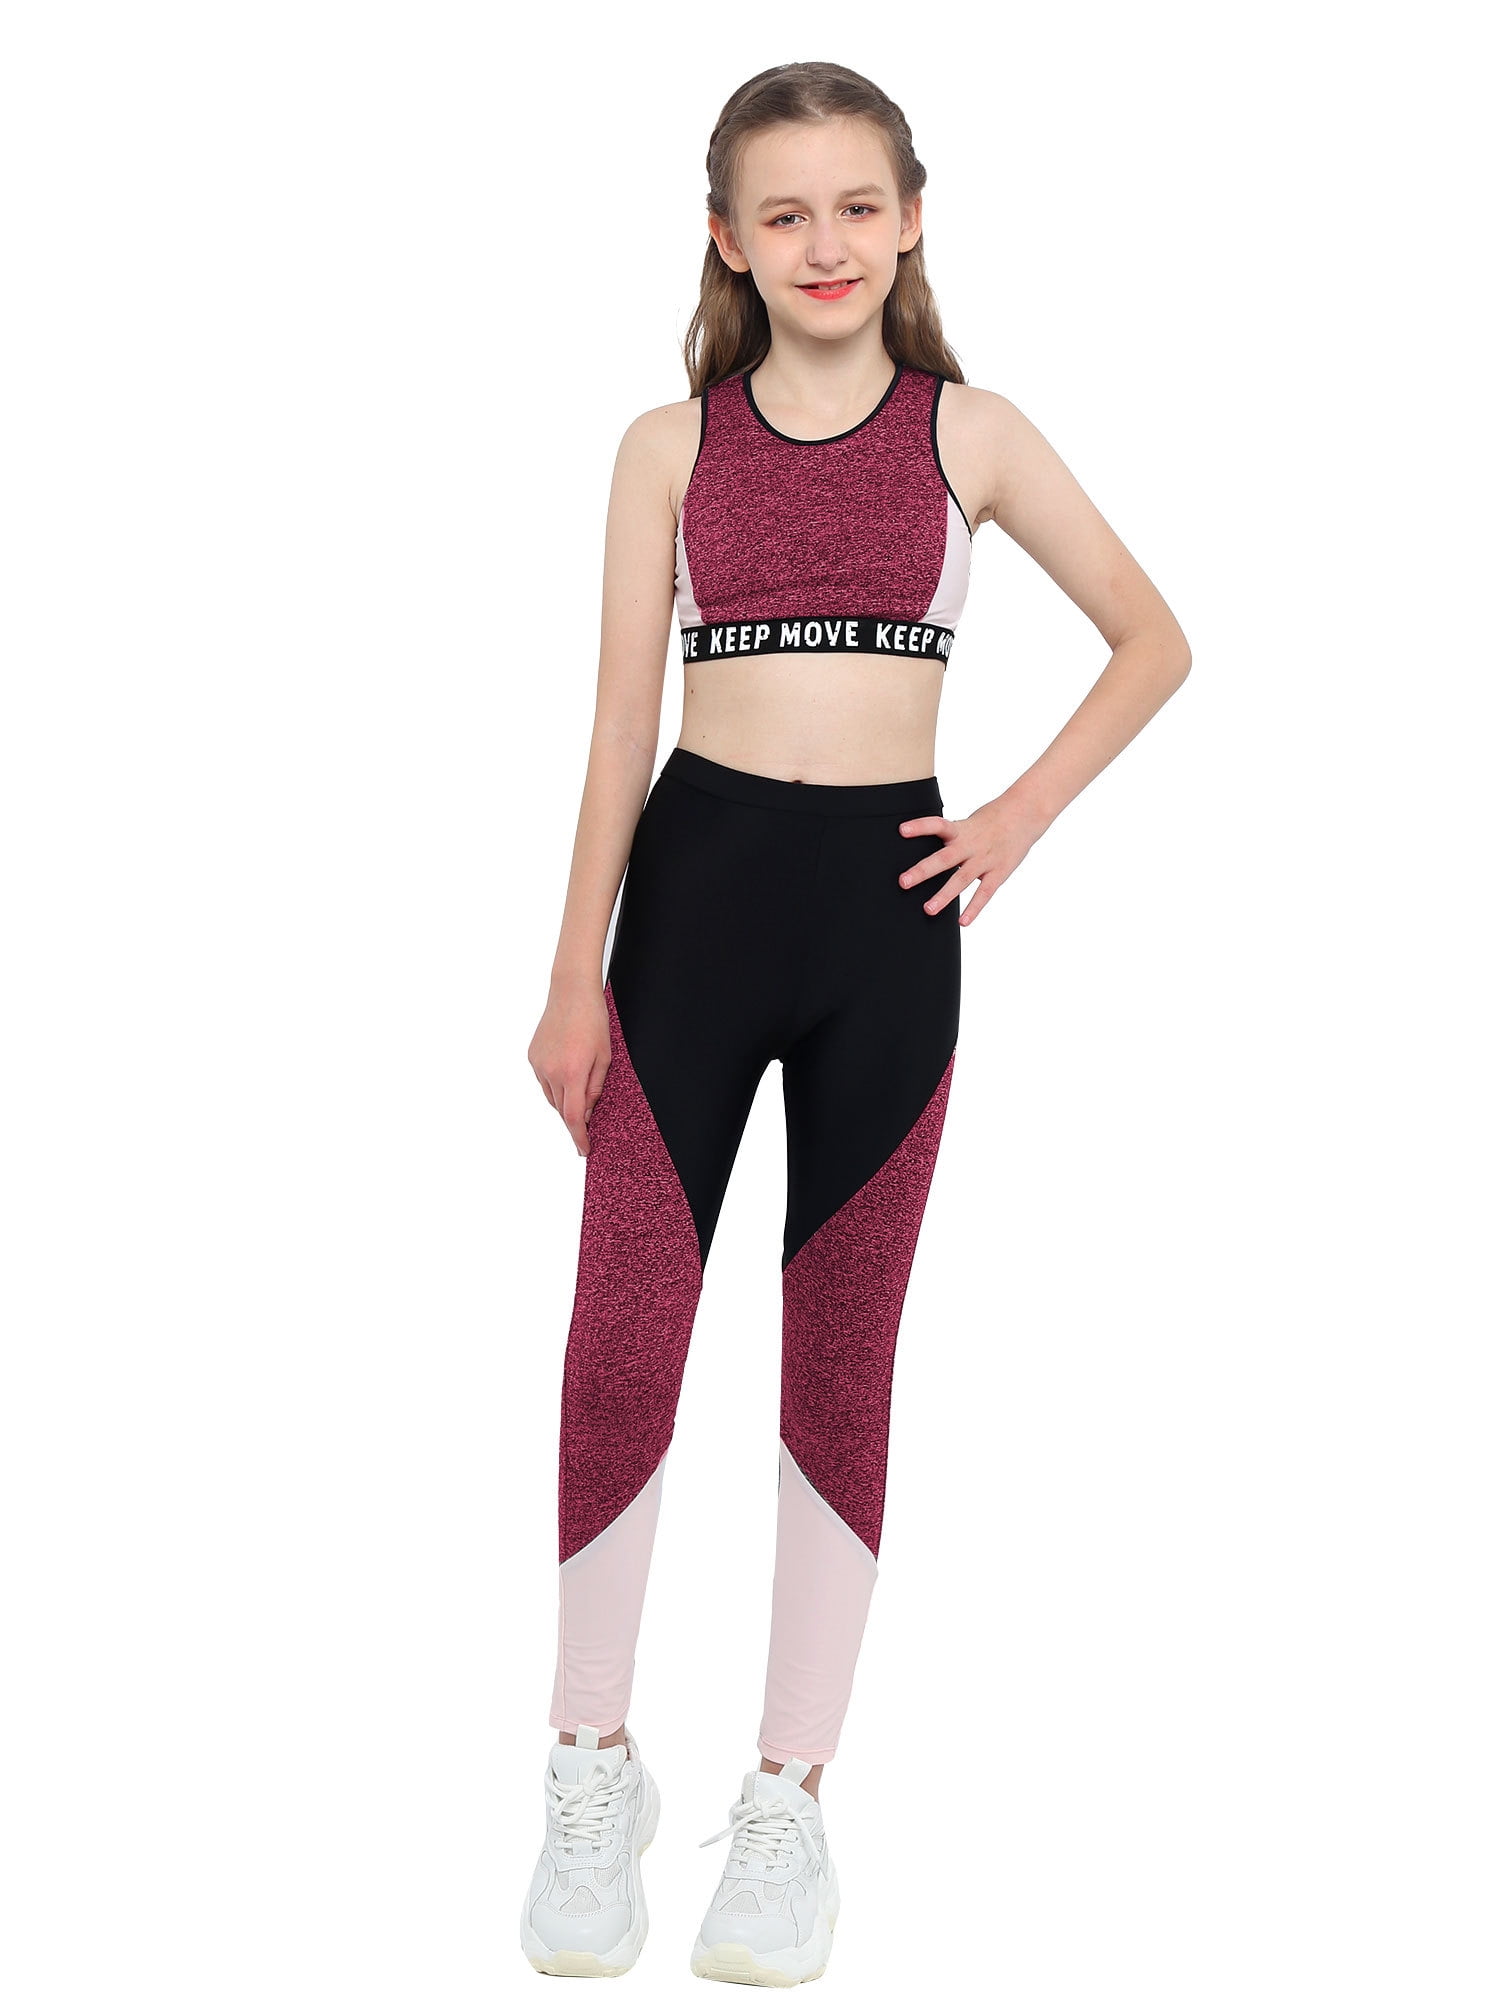 DPOIS Kids Girls Gymnastic Dance Outfit Crop Tops with Athletic Leggings Workout  Activewear Blue 12 